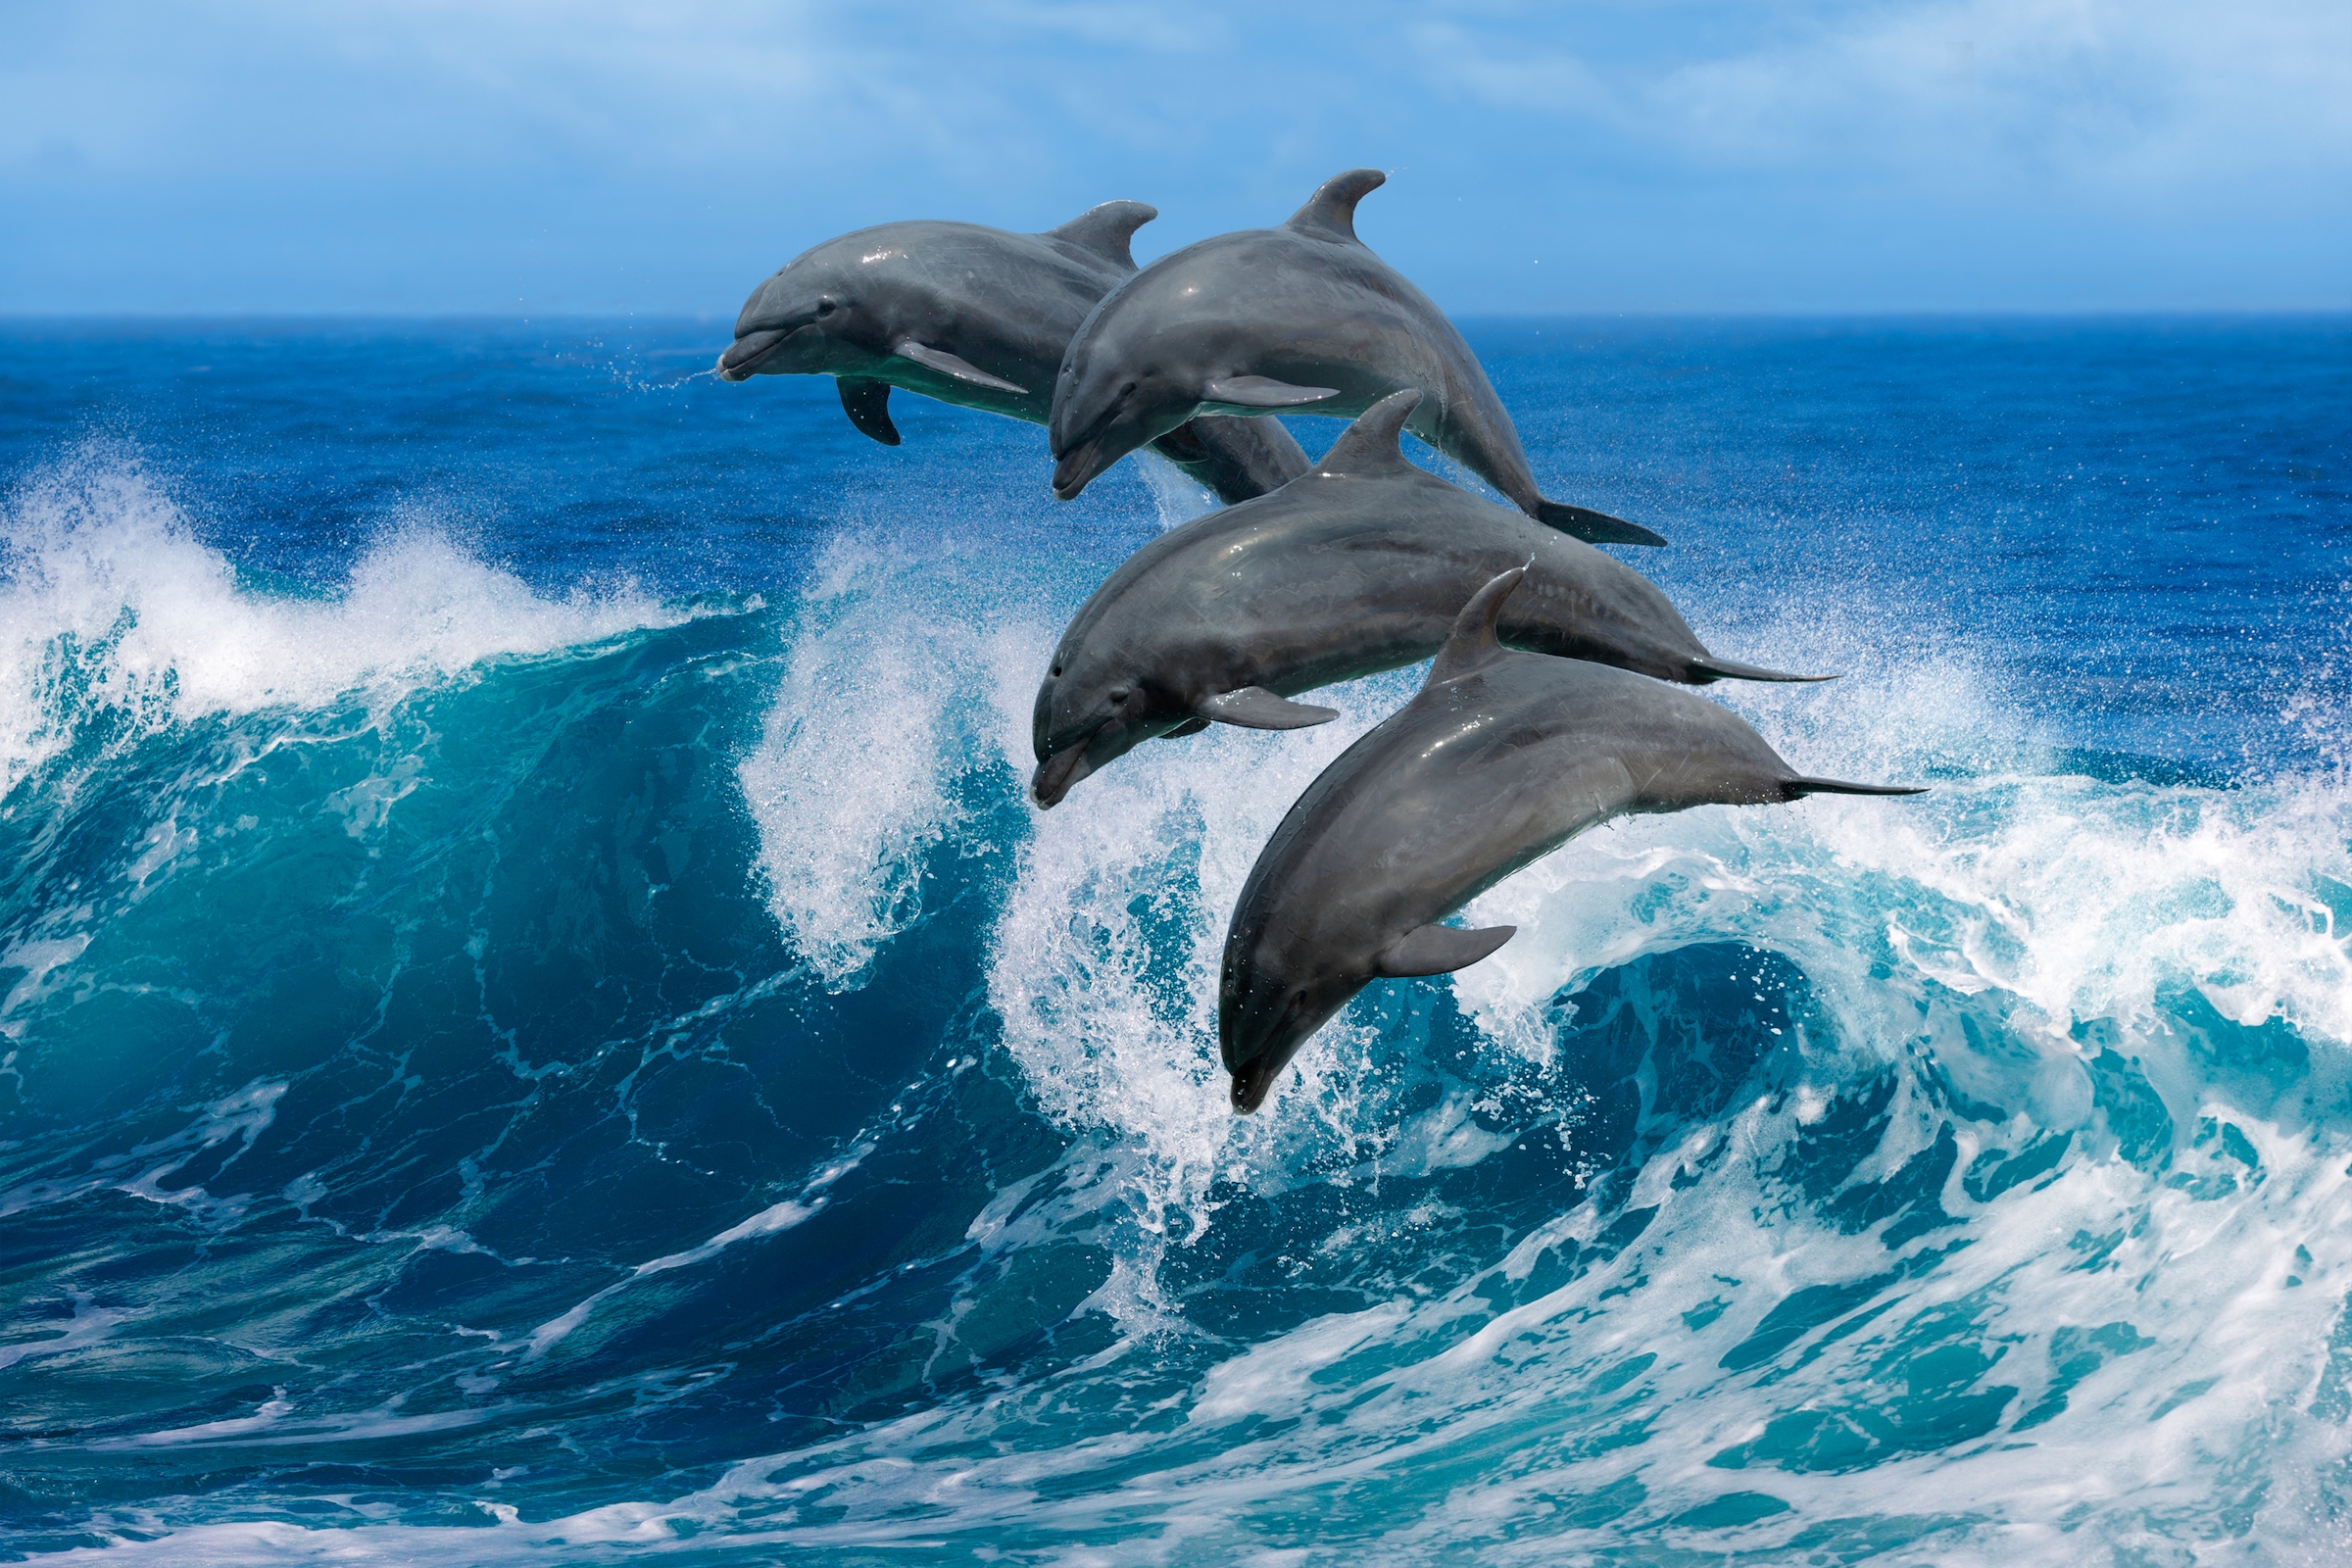 Fototapete »Playful Dolphins«